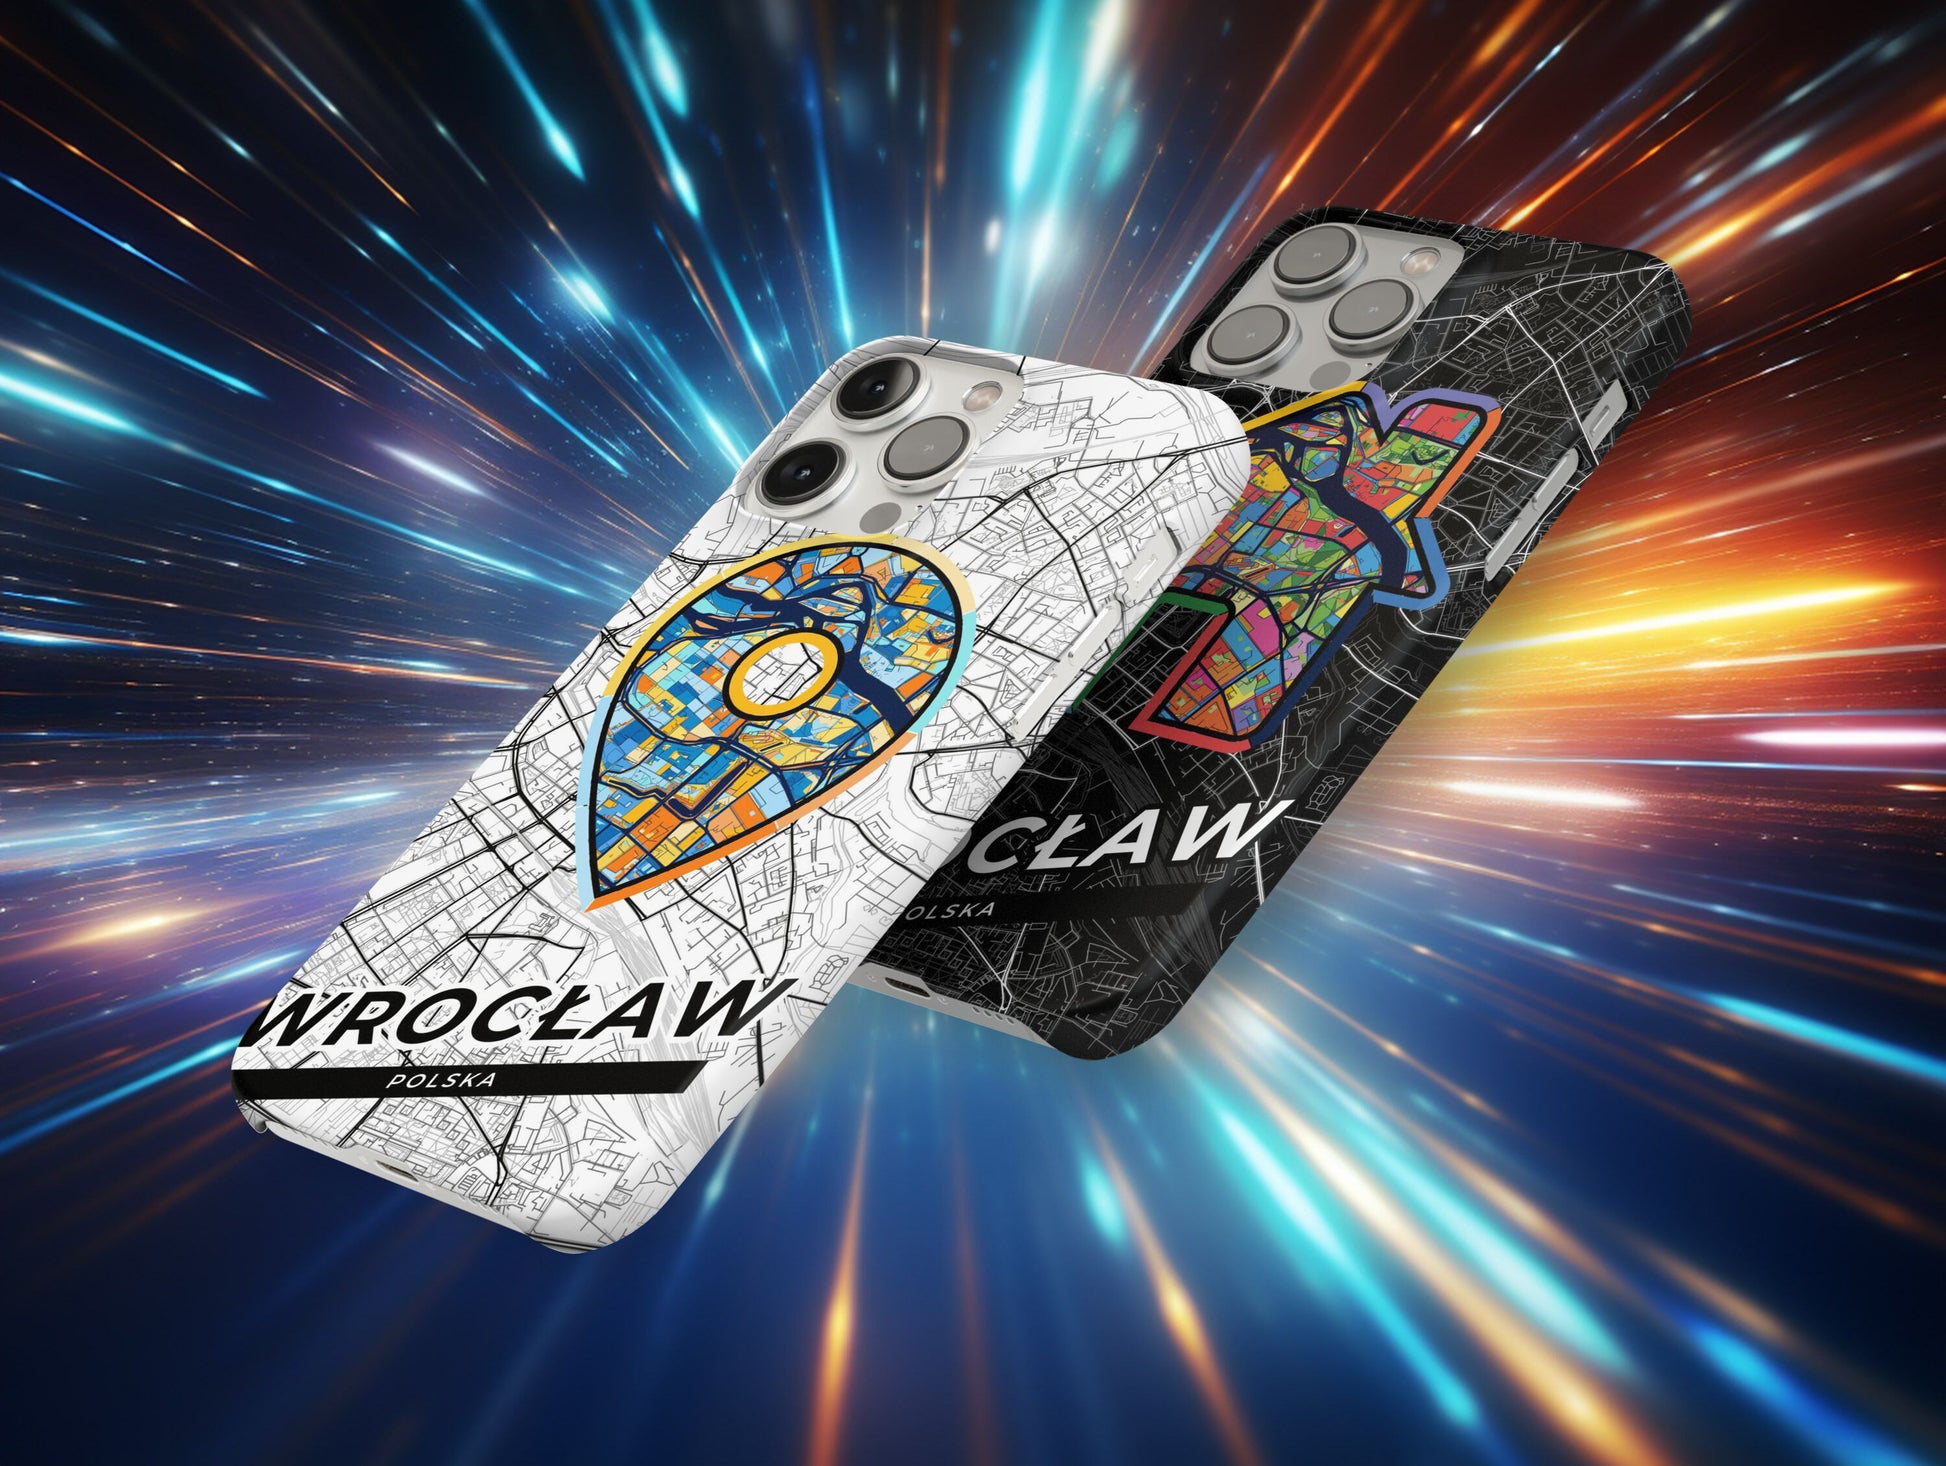 Wrocław Poland slim phone case with colorful icon